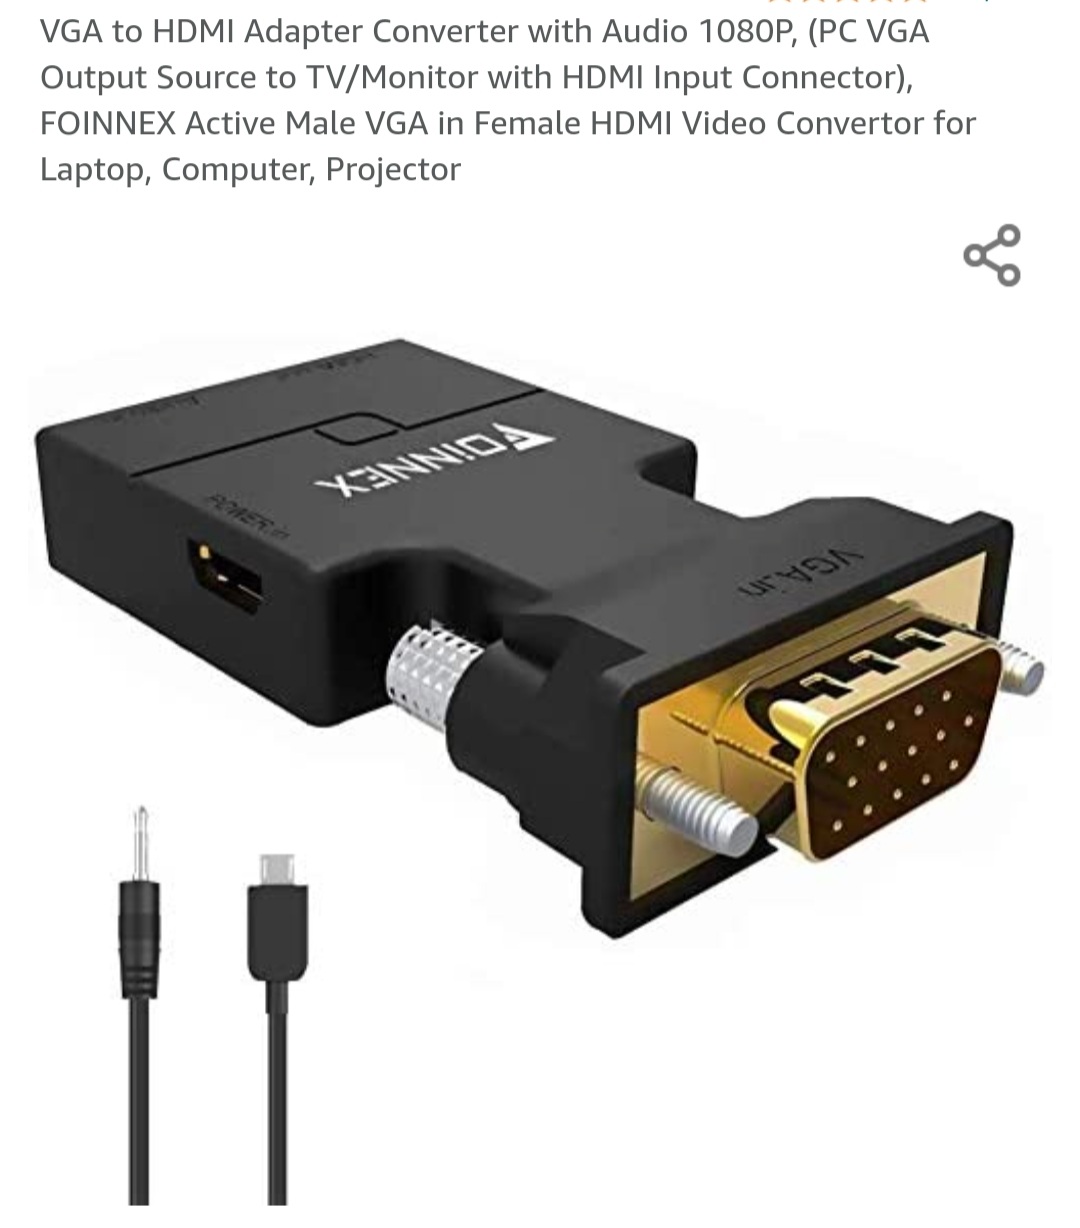 Giveet VGA to HDMI Adapter with Audio, PC VGA Source Output to TV/Monitor  with HDMI Connector, 1080P Male VGA to Female HDMI Converter for Computer